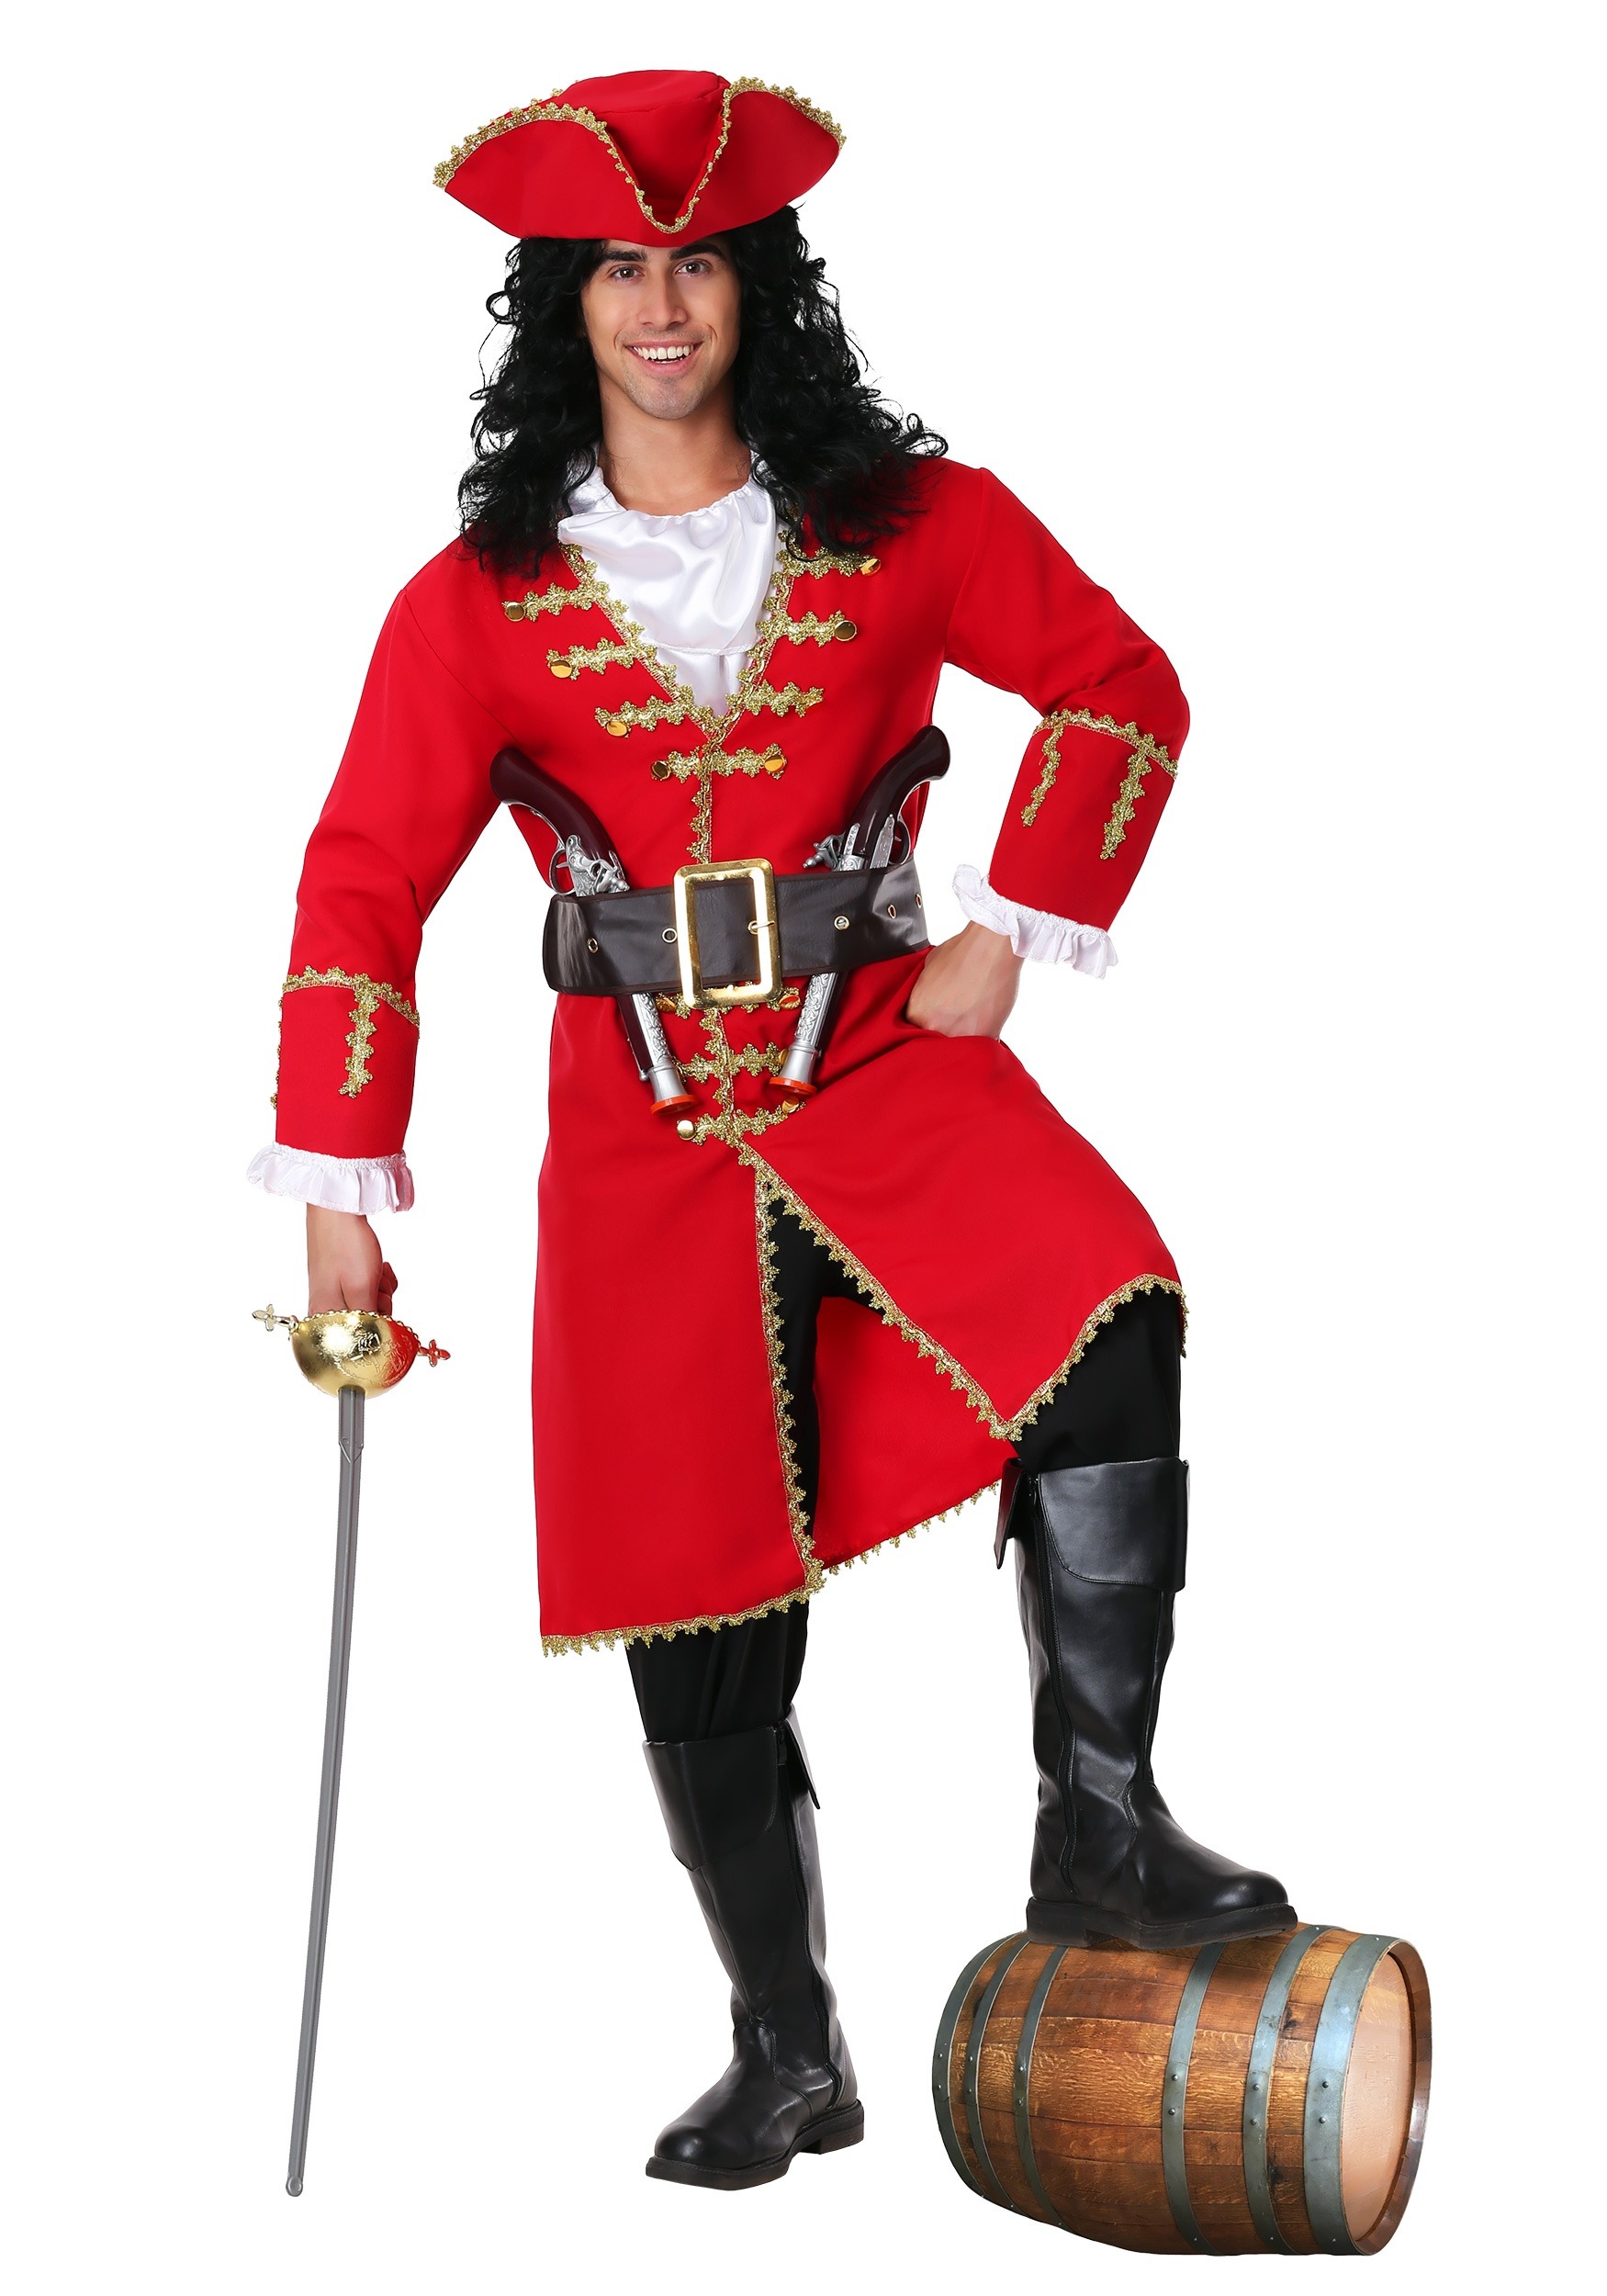 Captain Blackheart Pirate Costume Red Pirate Jacket 9542